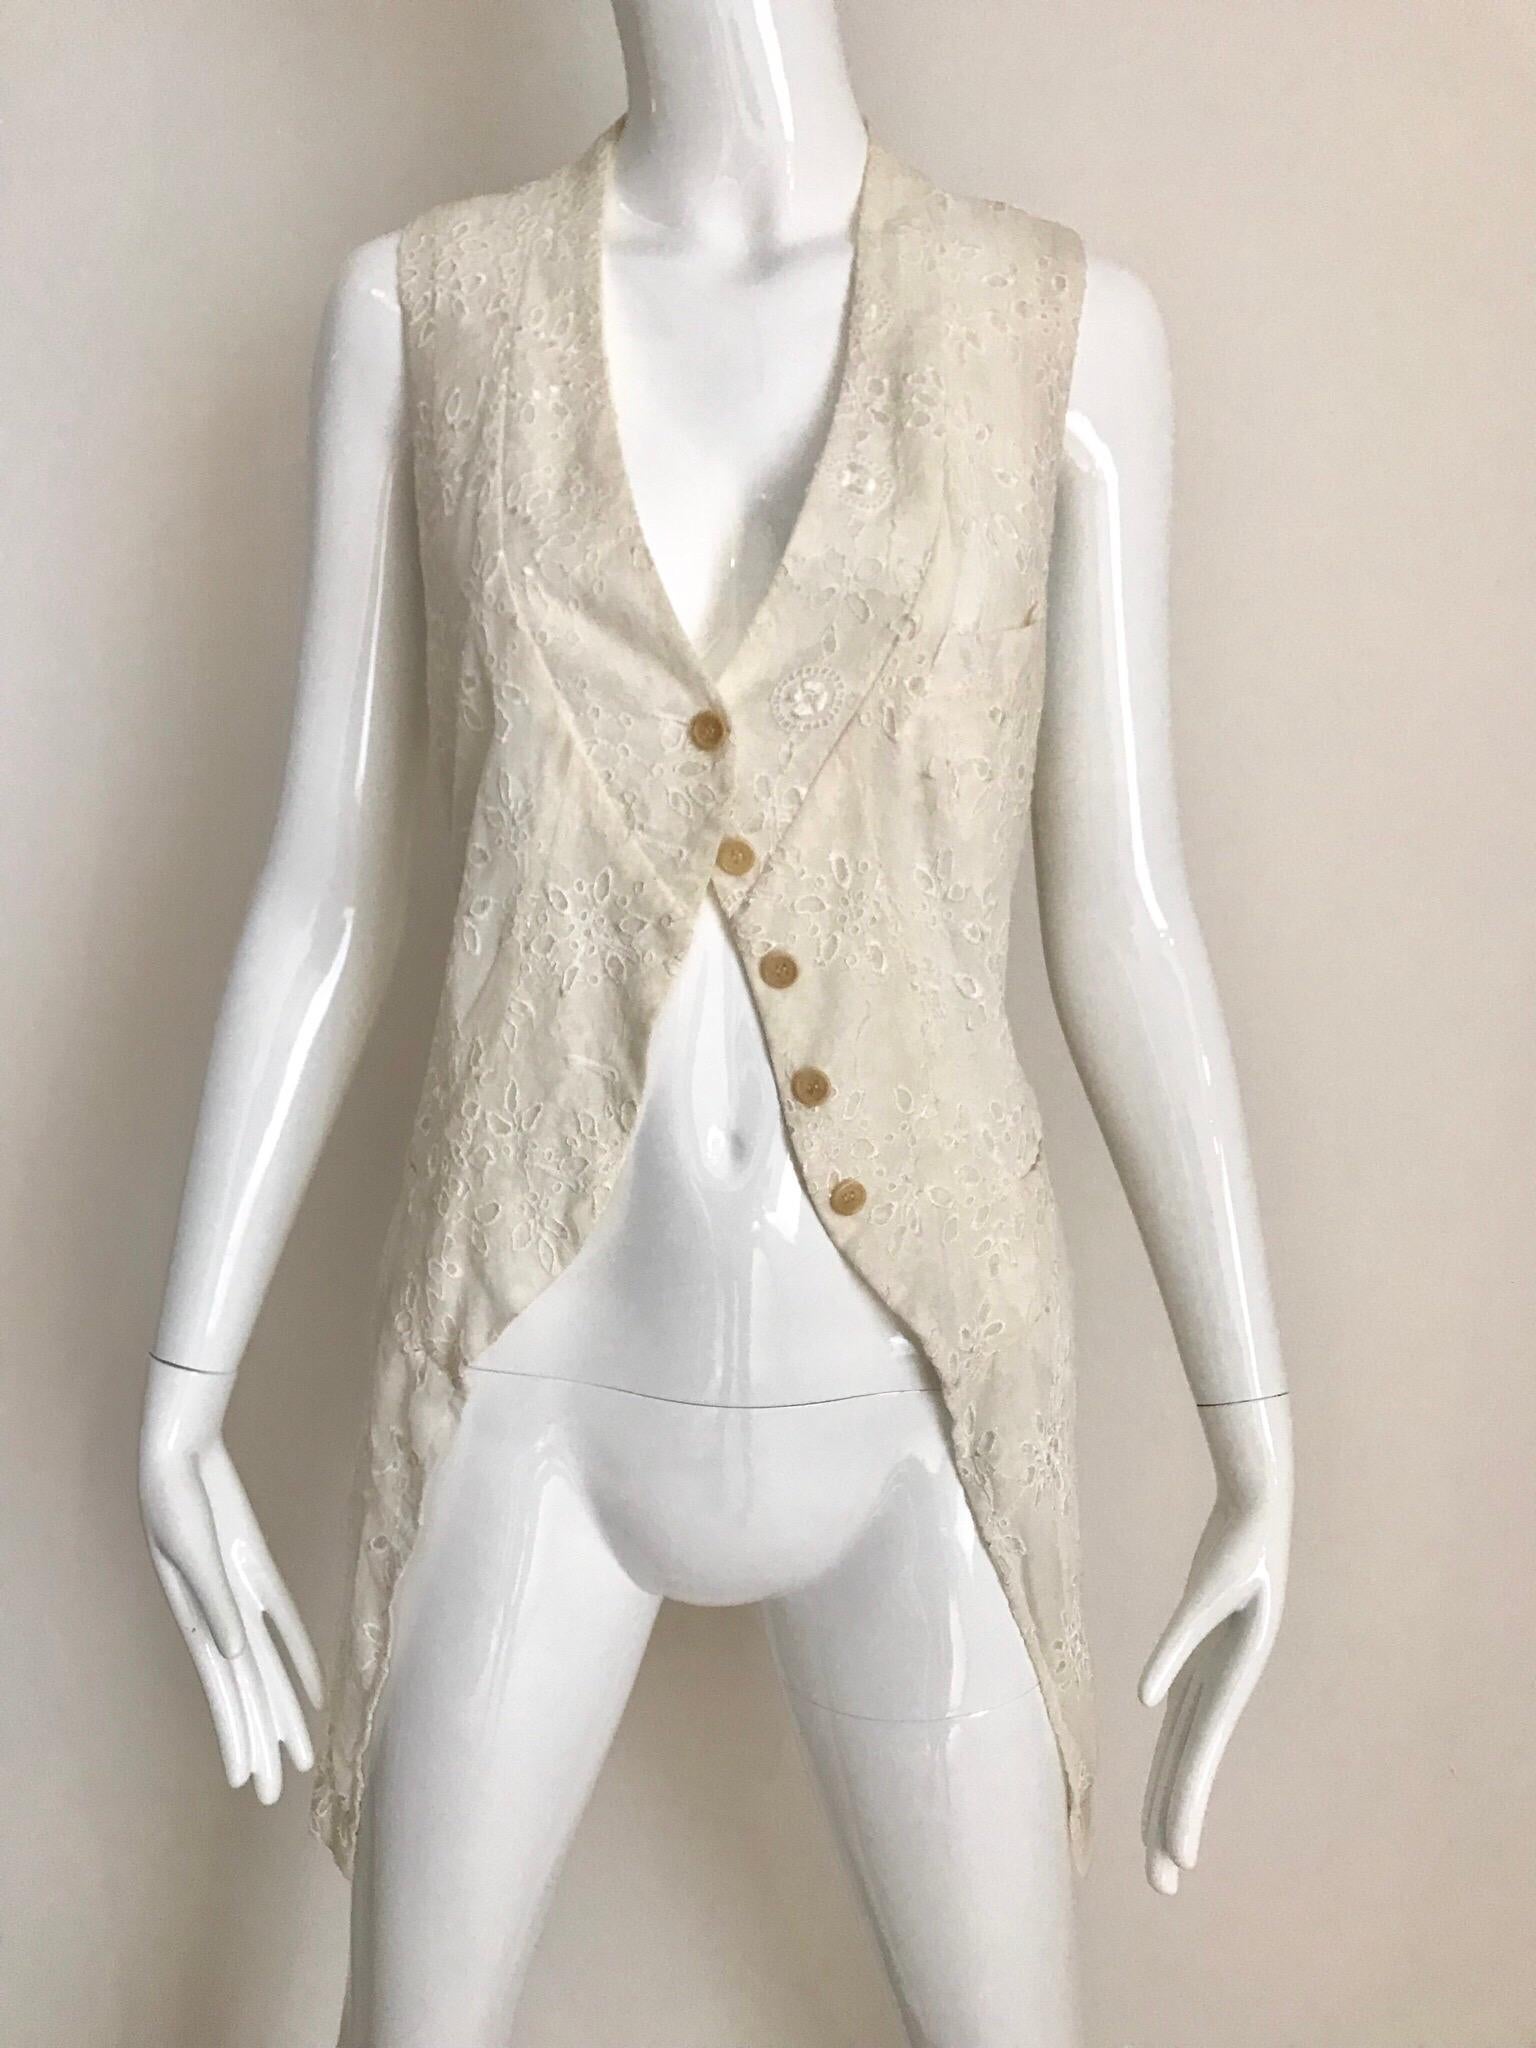 Ann Demeleumesteer Creme Eyelet Silk Vest In Excellent Condition For Sale In Beverly Hills, CA